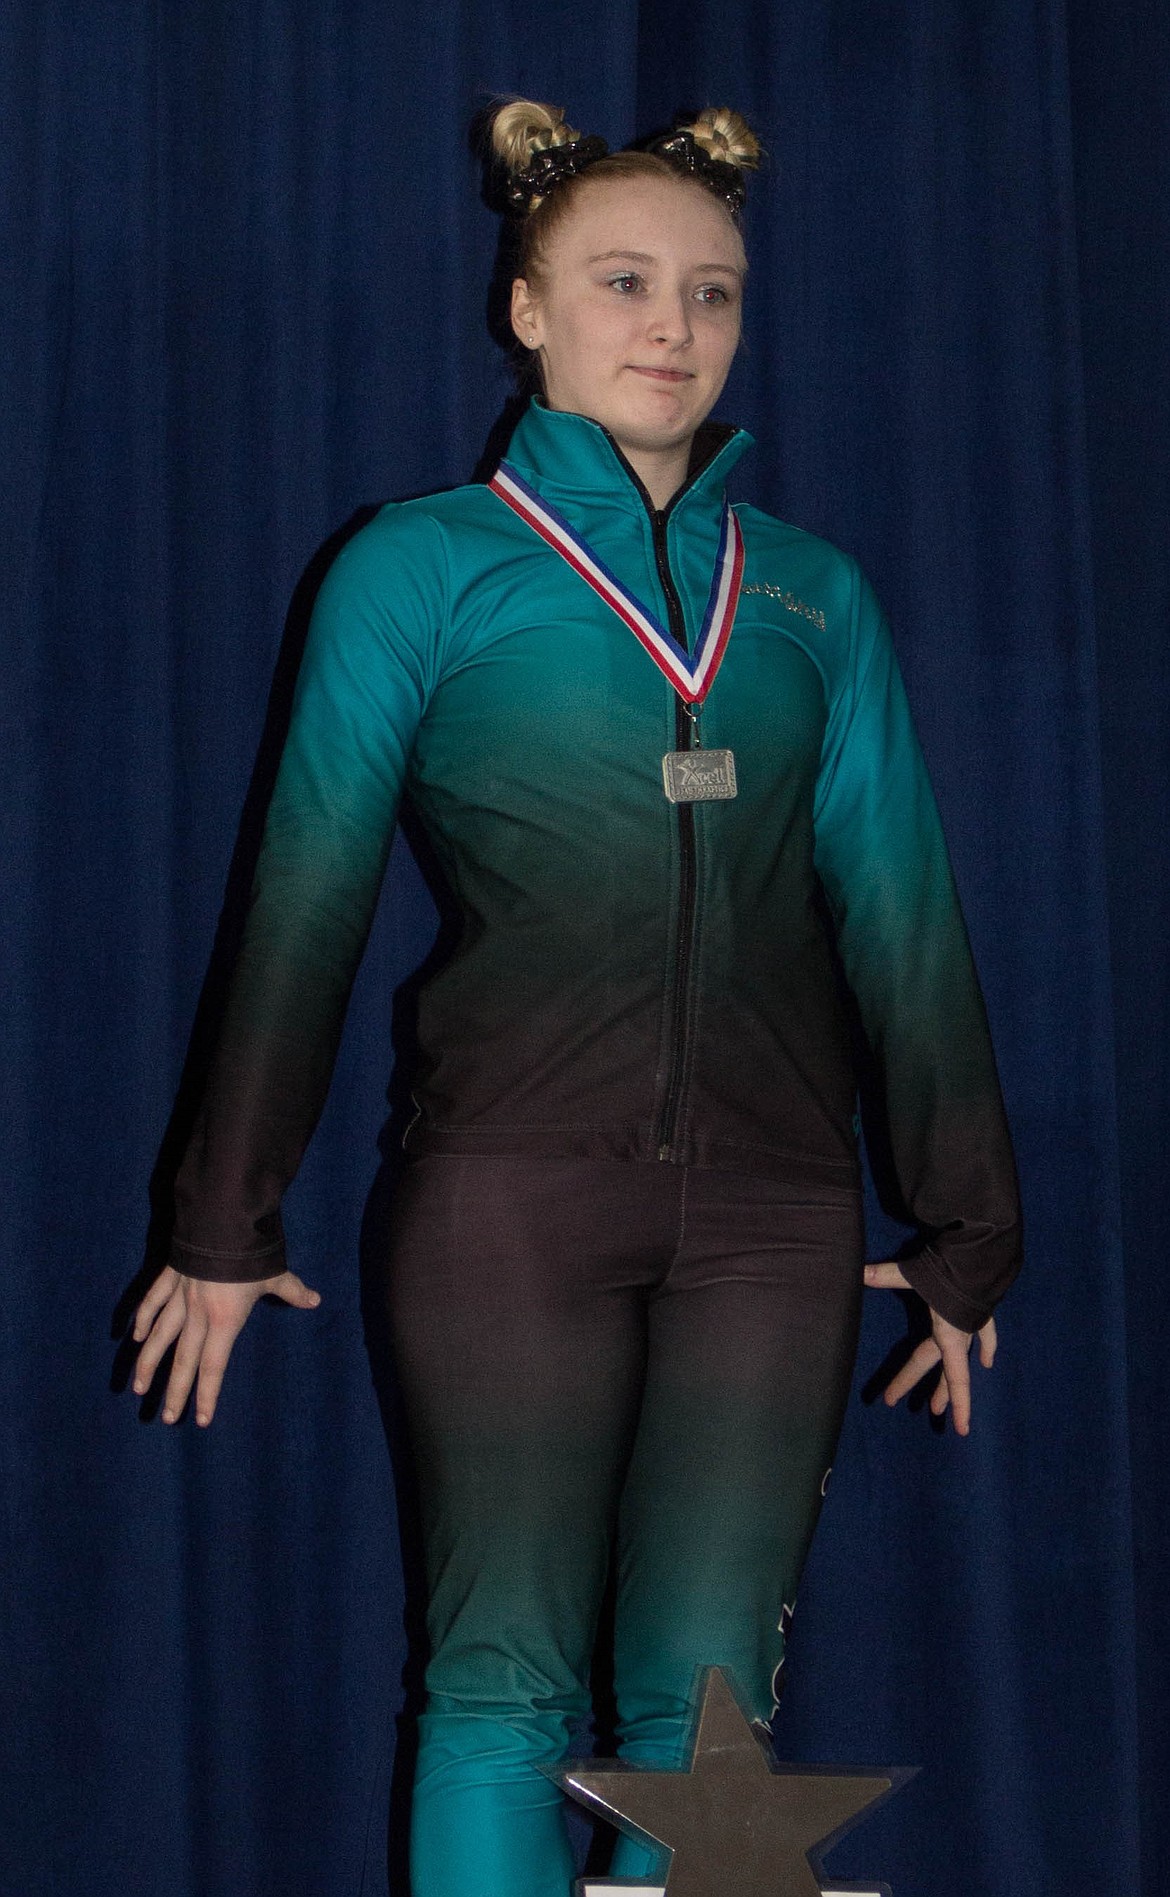 Courtesy photo
Bethany Frey of Technique Gymnastics won the Xcel Platinum beam title at the recent Xcel state championships in Meridian.